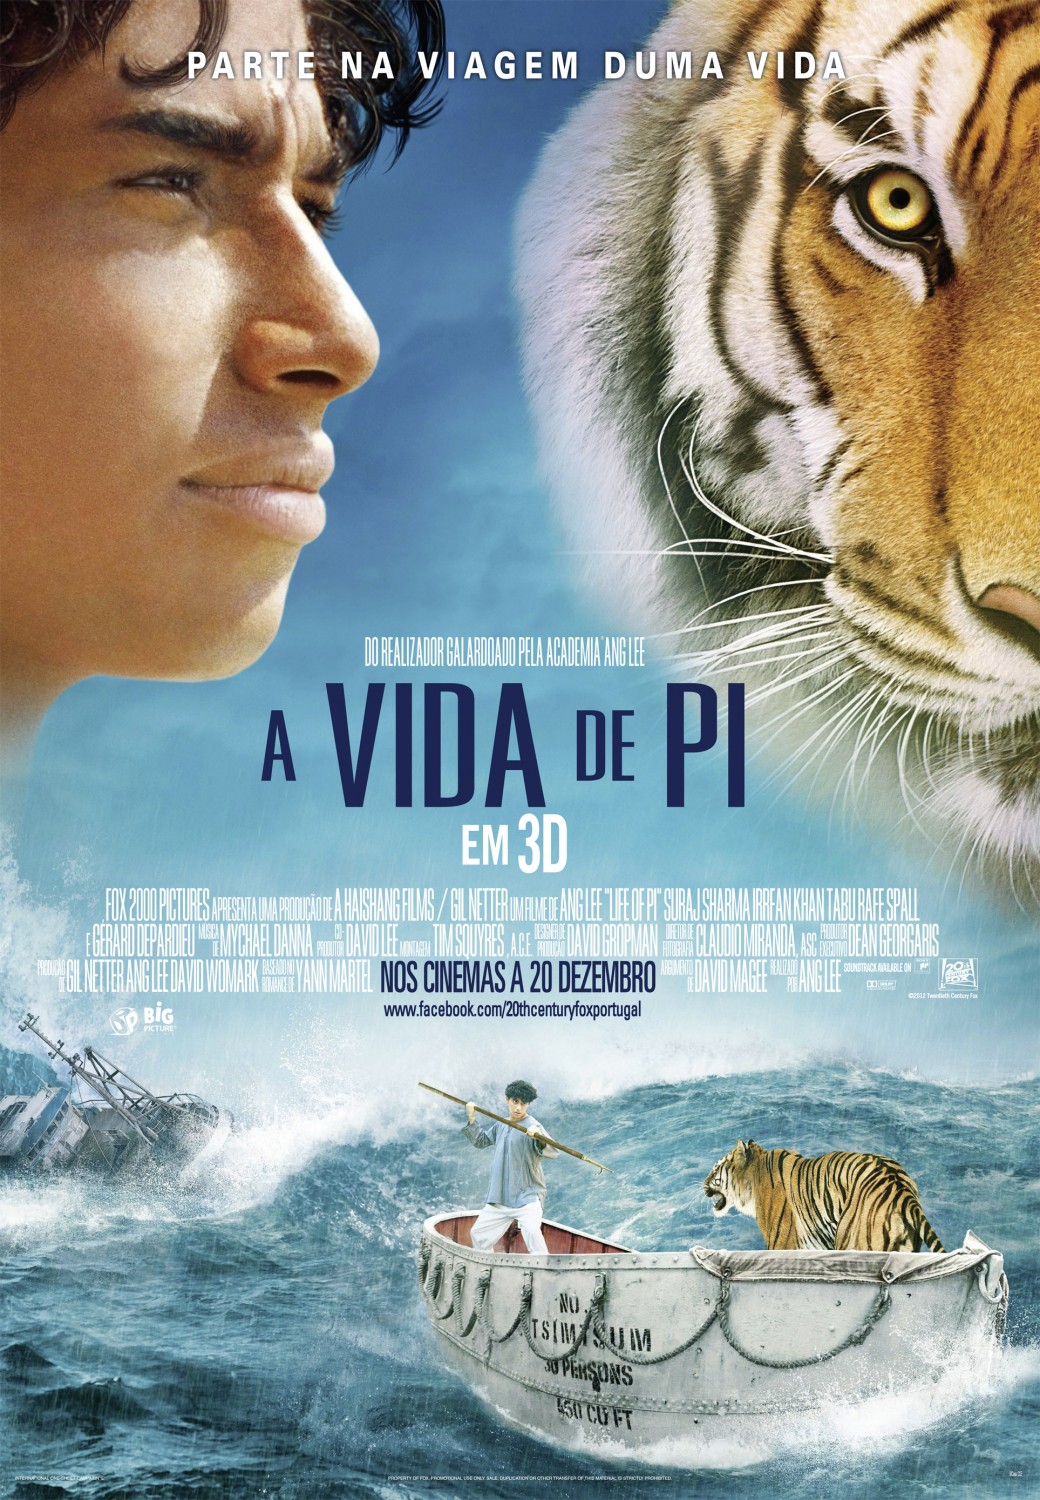 life of pi full movie free download youtube